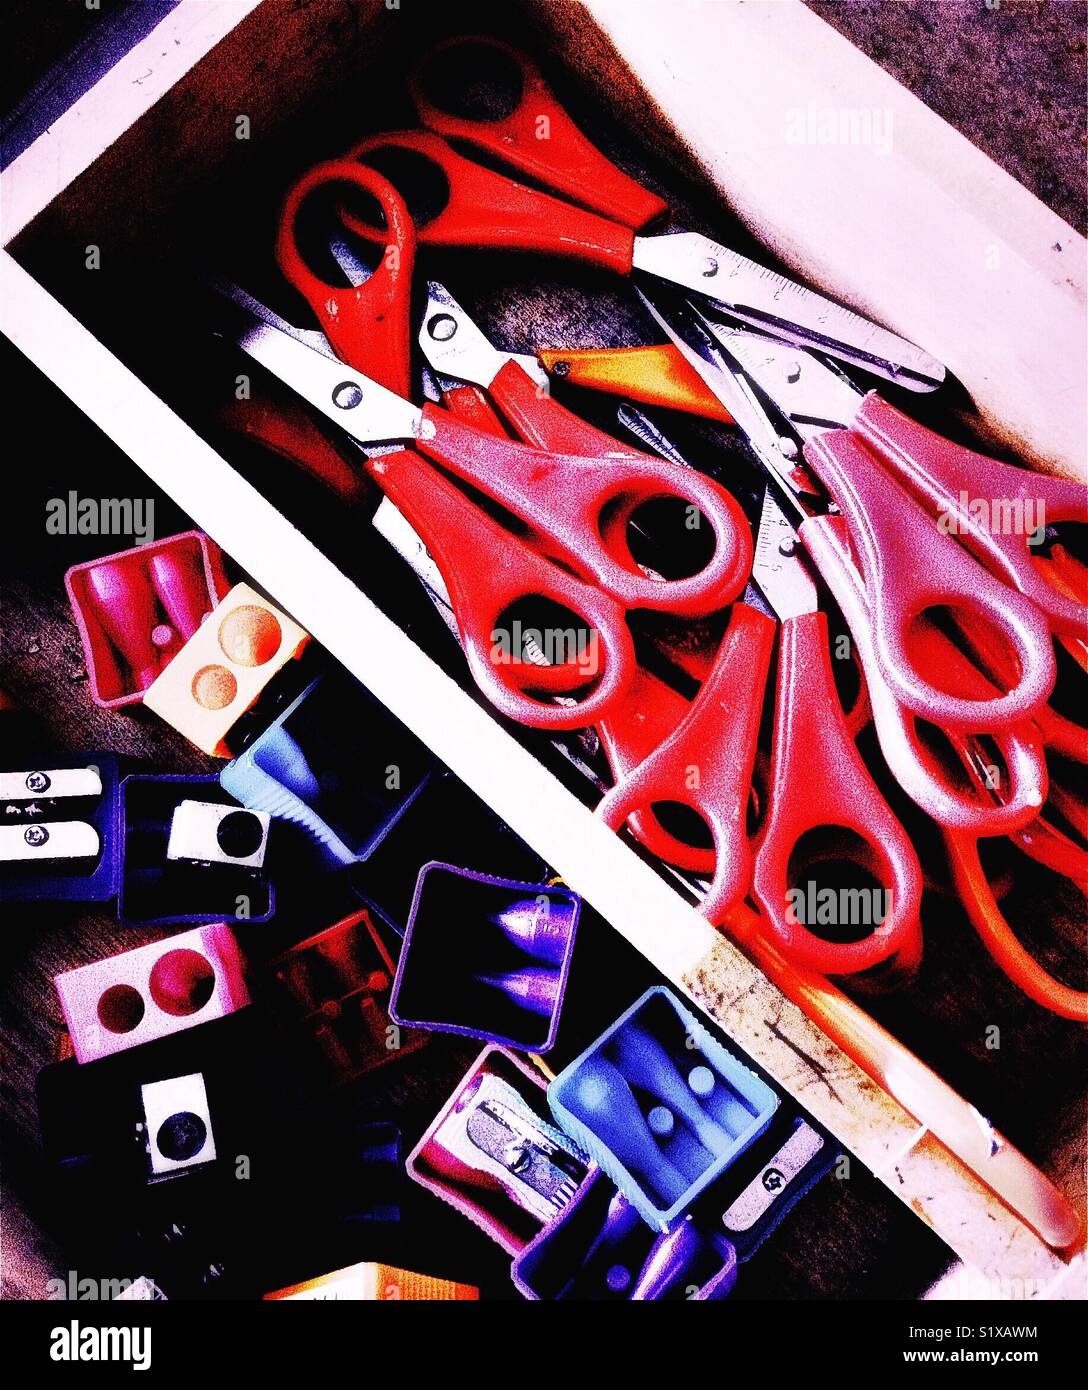 Box of red handled scissors and coloured pencil sharpeners Stock Photo